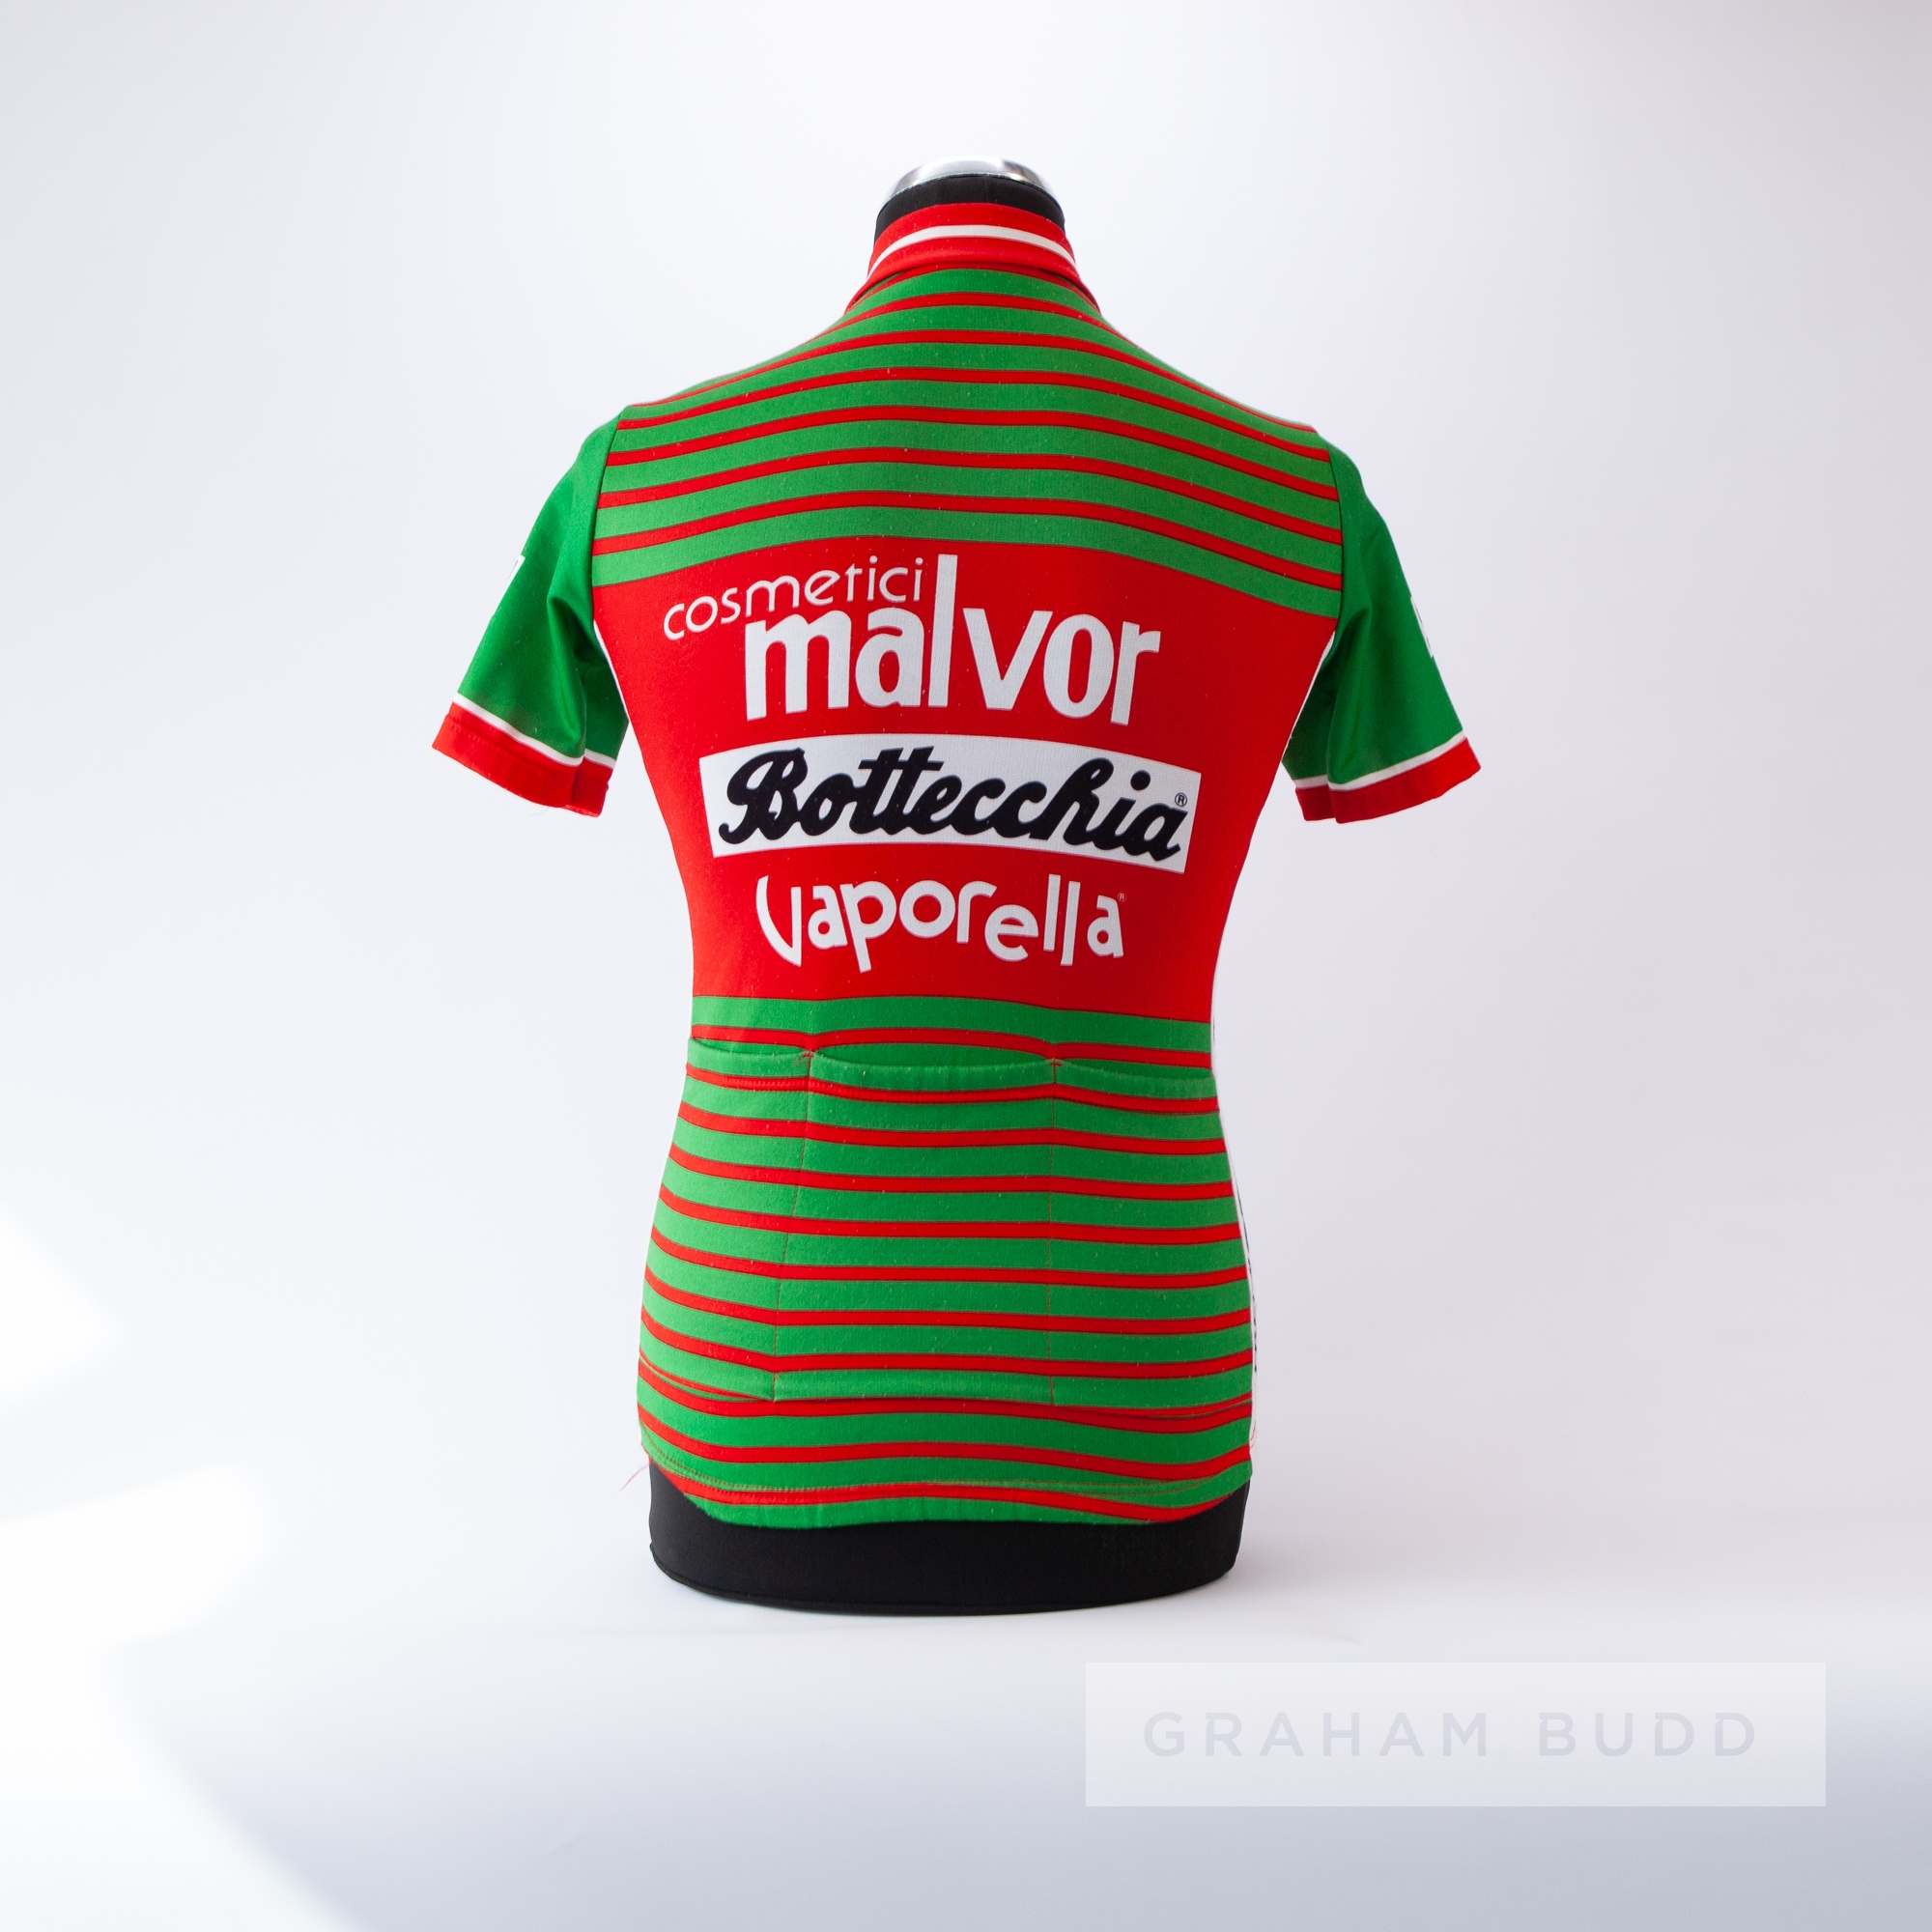 1986 green, red and white Malvor Bottecchia Vaporella Cycling race jersey, scarce, polyester short- - Image 4 of 4